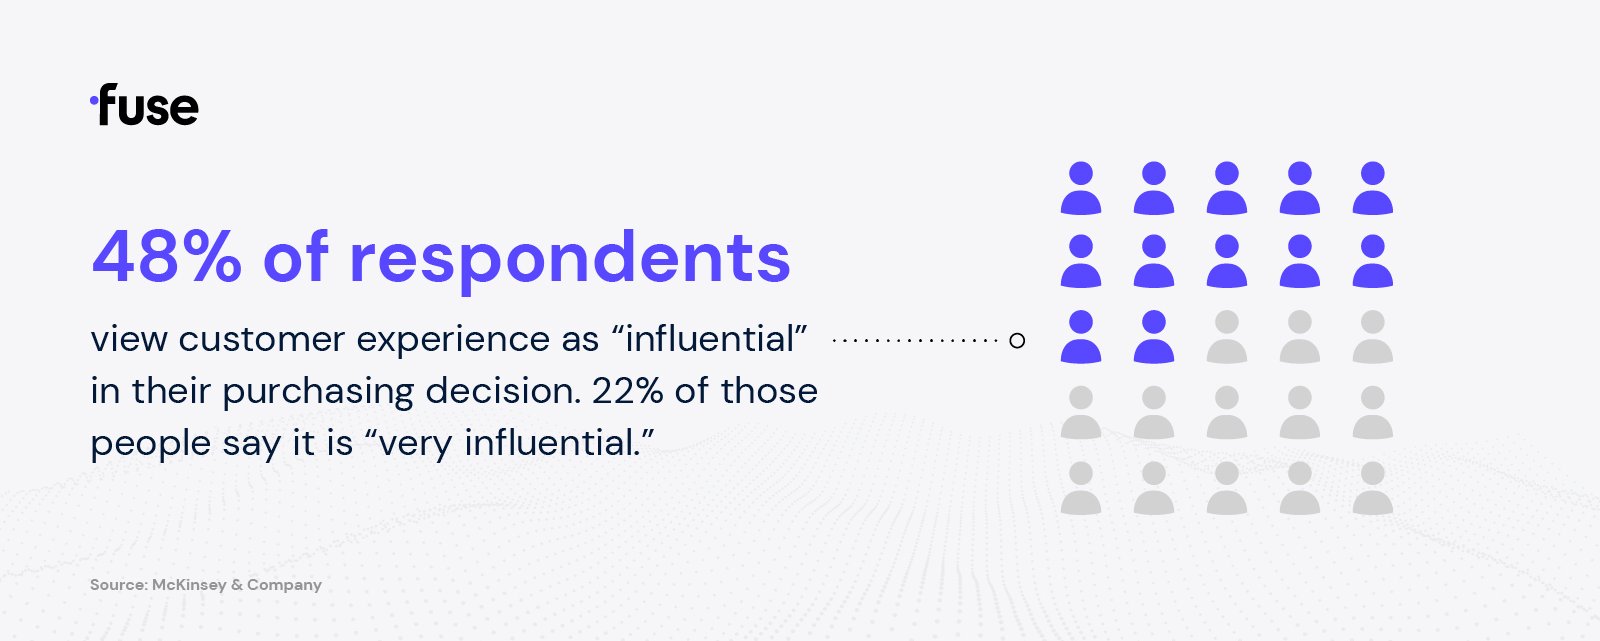 48% of respondents view customer experience as "influential" in their purchasing decision. 22% of those people say it is "very influential."